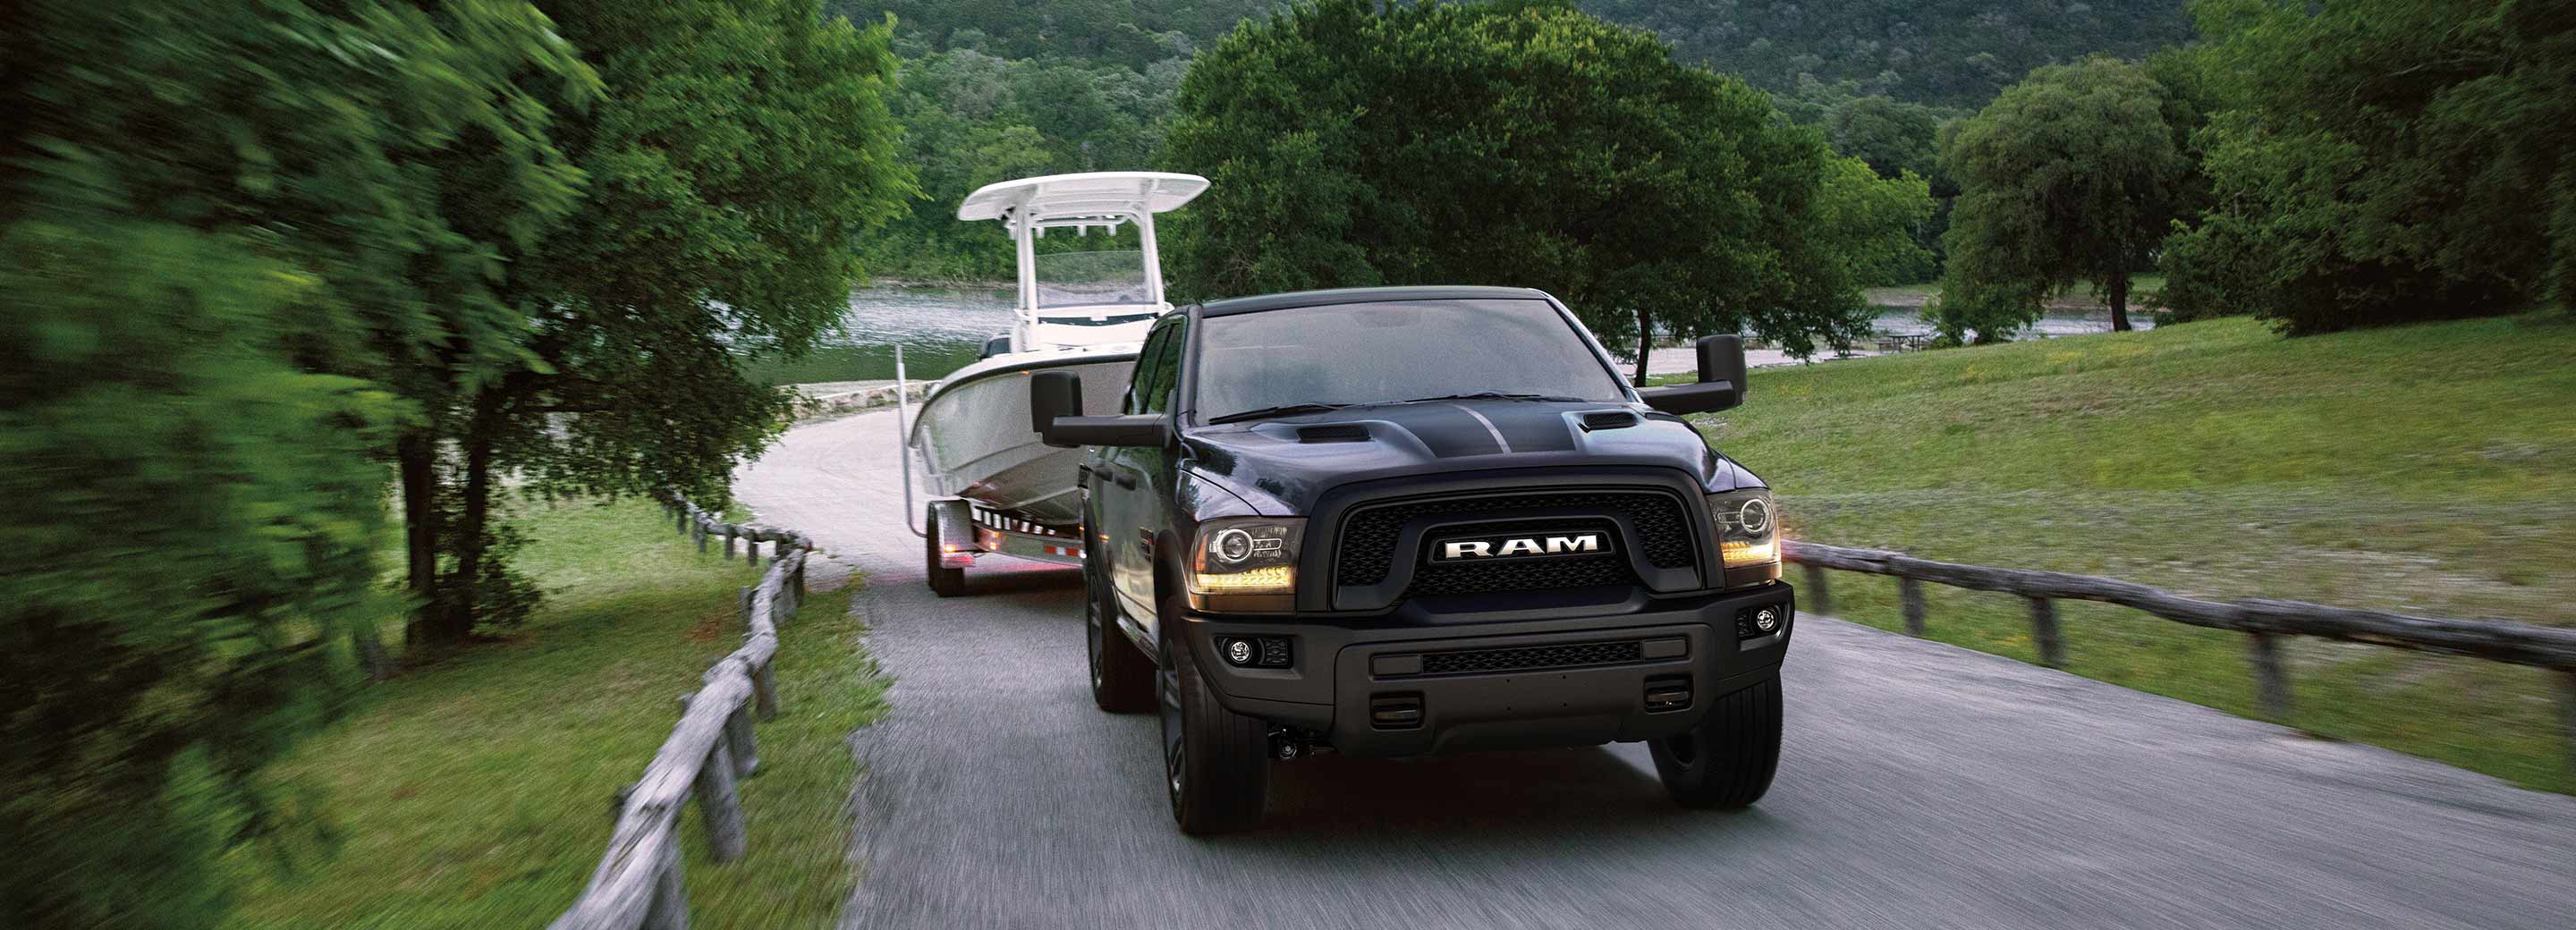 The 2022 Ram 1500 Classic towing a boat on a road near a lake.